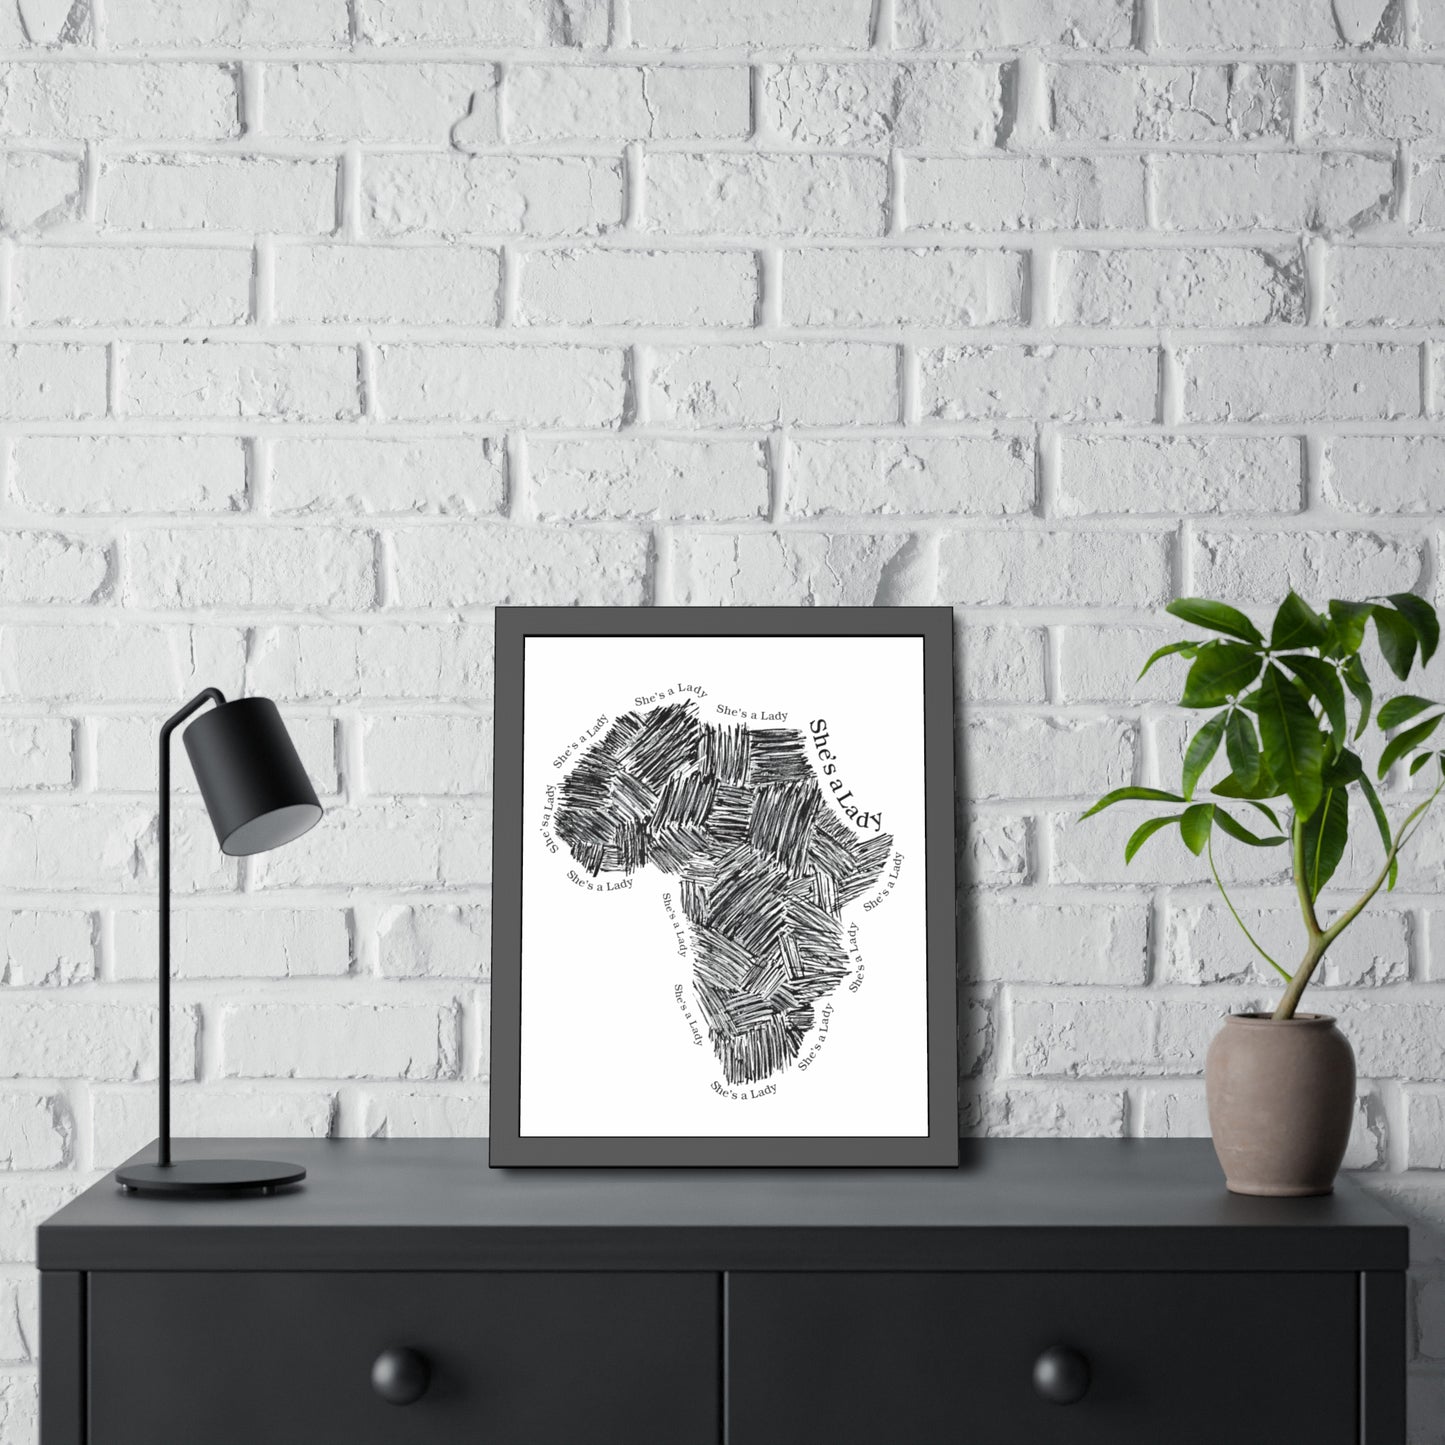 She's a Lady Africa Map Framed Poster